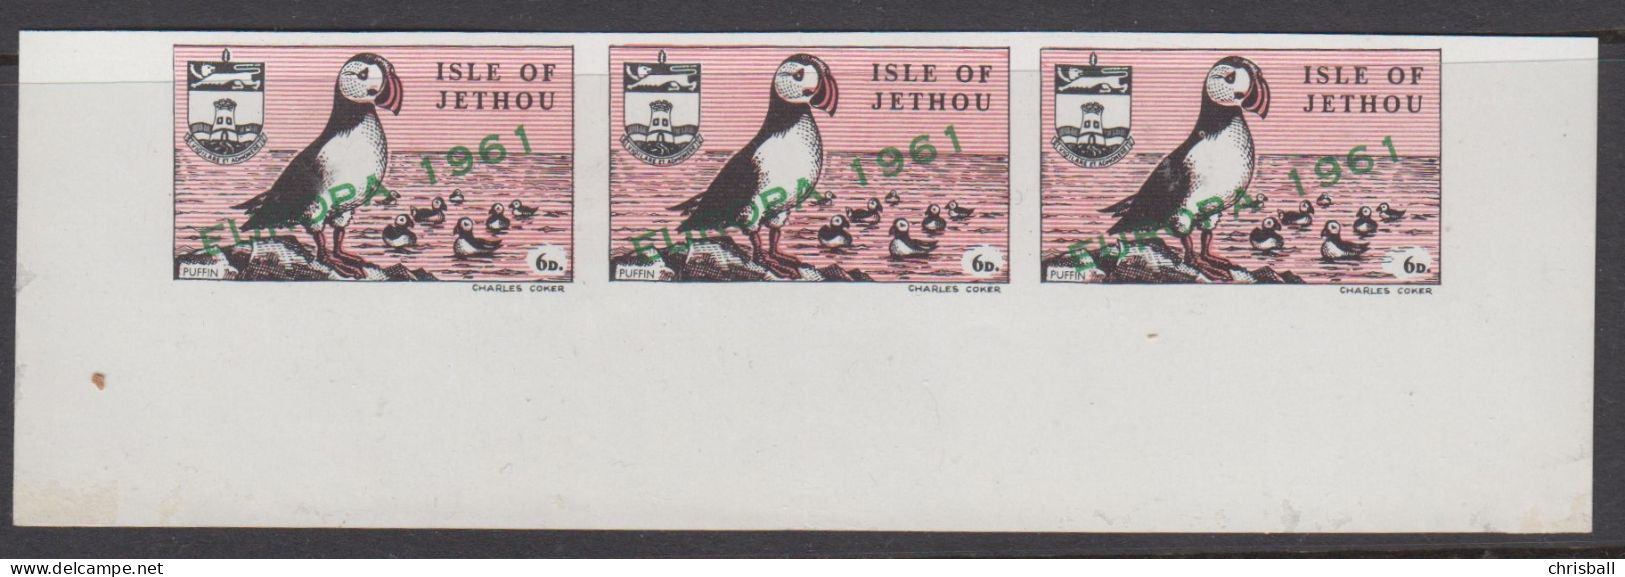 Guernsey Jethou Europa 1961 6d, IMPERF Strip Of 3 Unmounted Mint - Guernesey